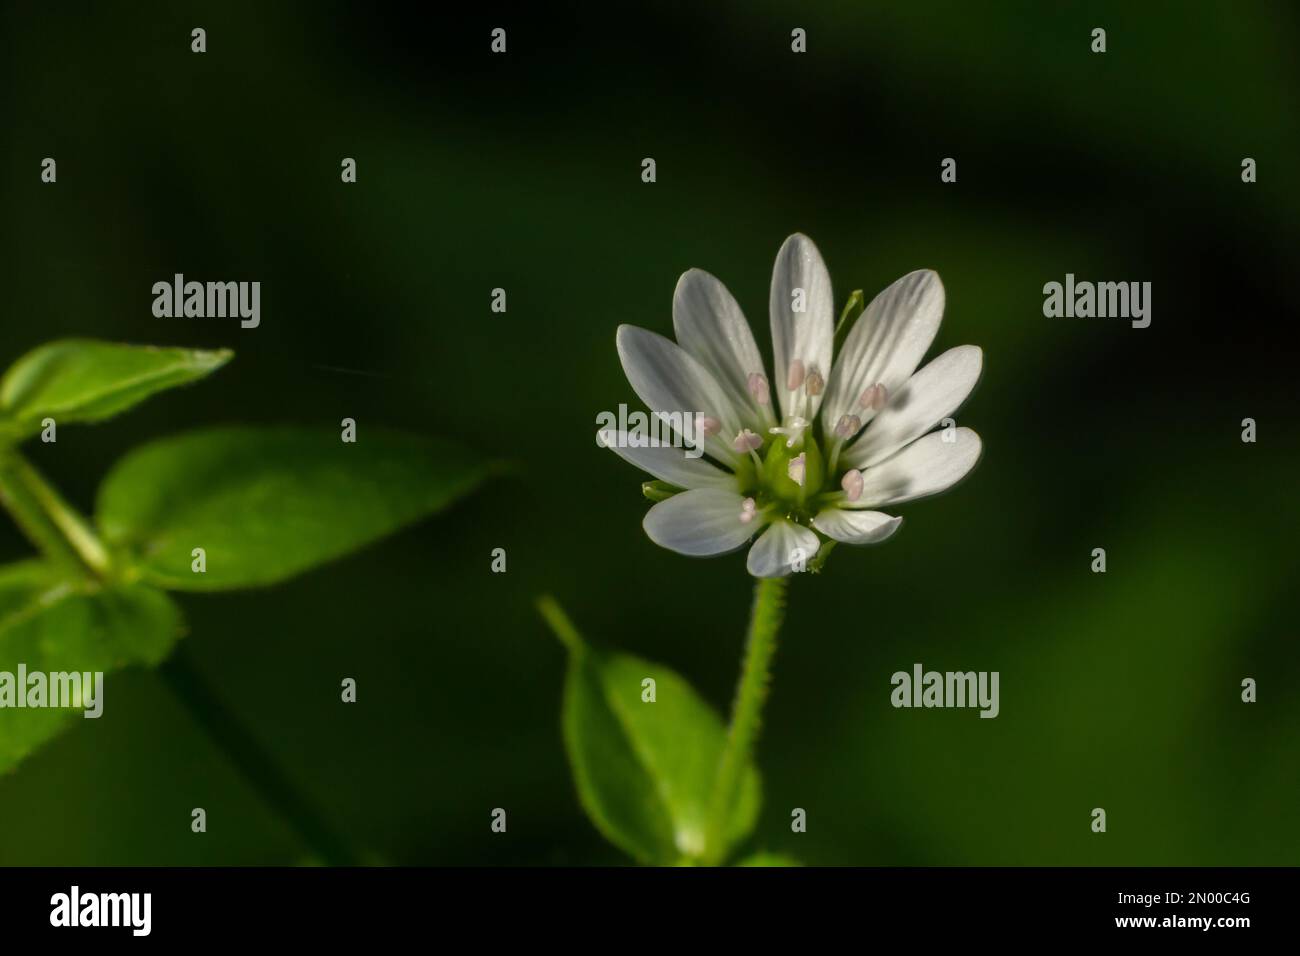 common chickweed, Stellaria media, white bloom with green blurred background. Stock Photo